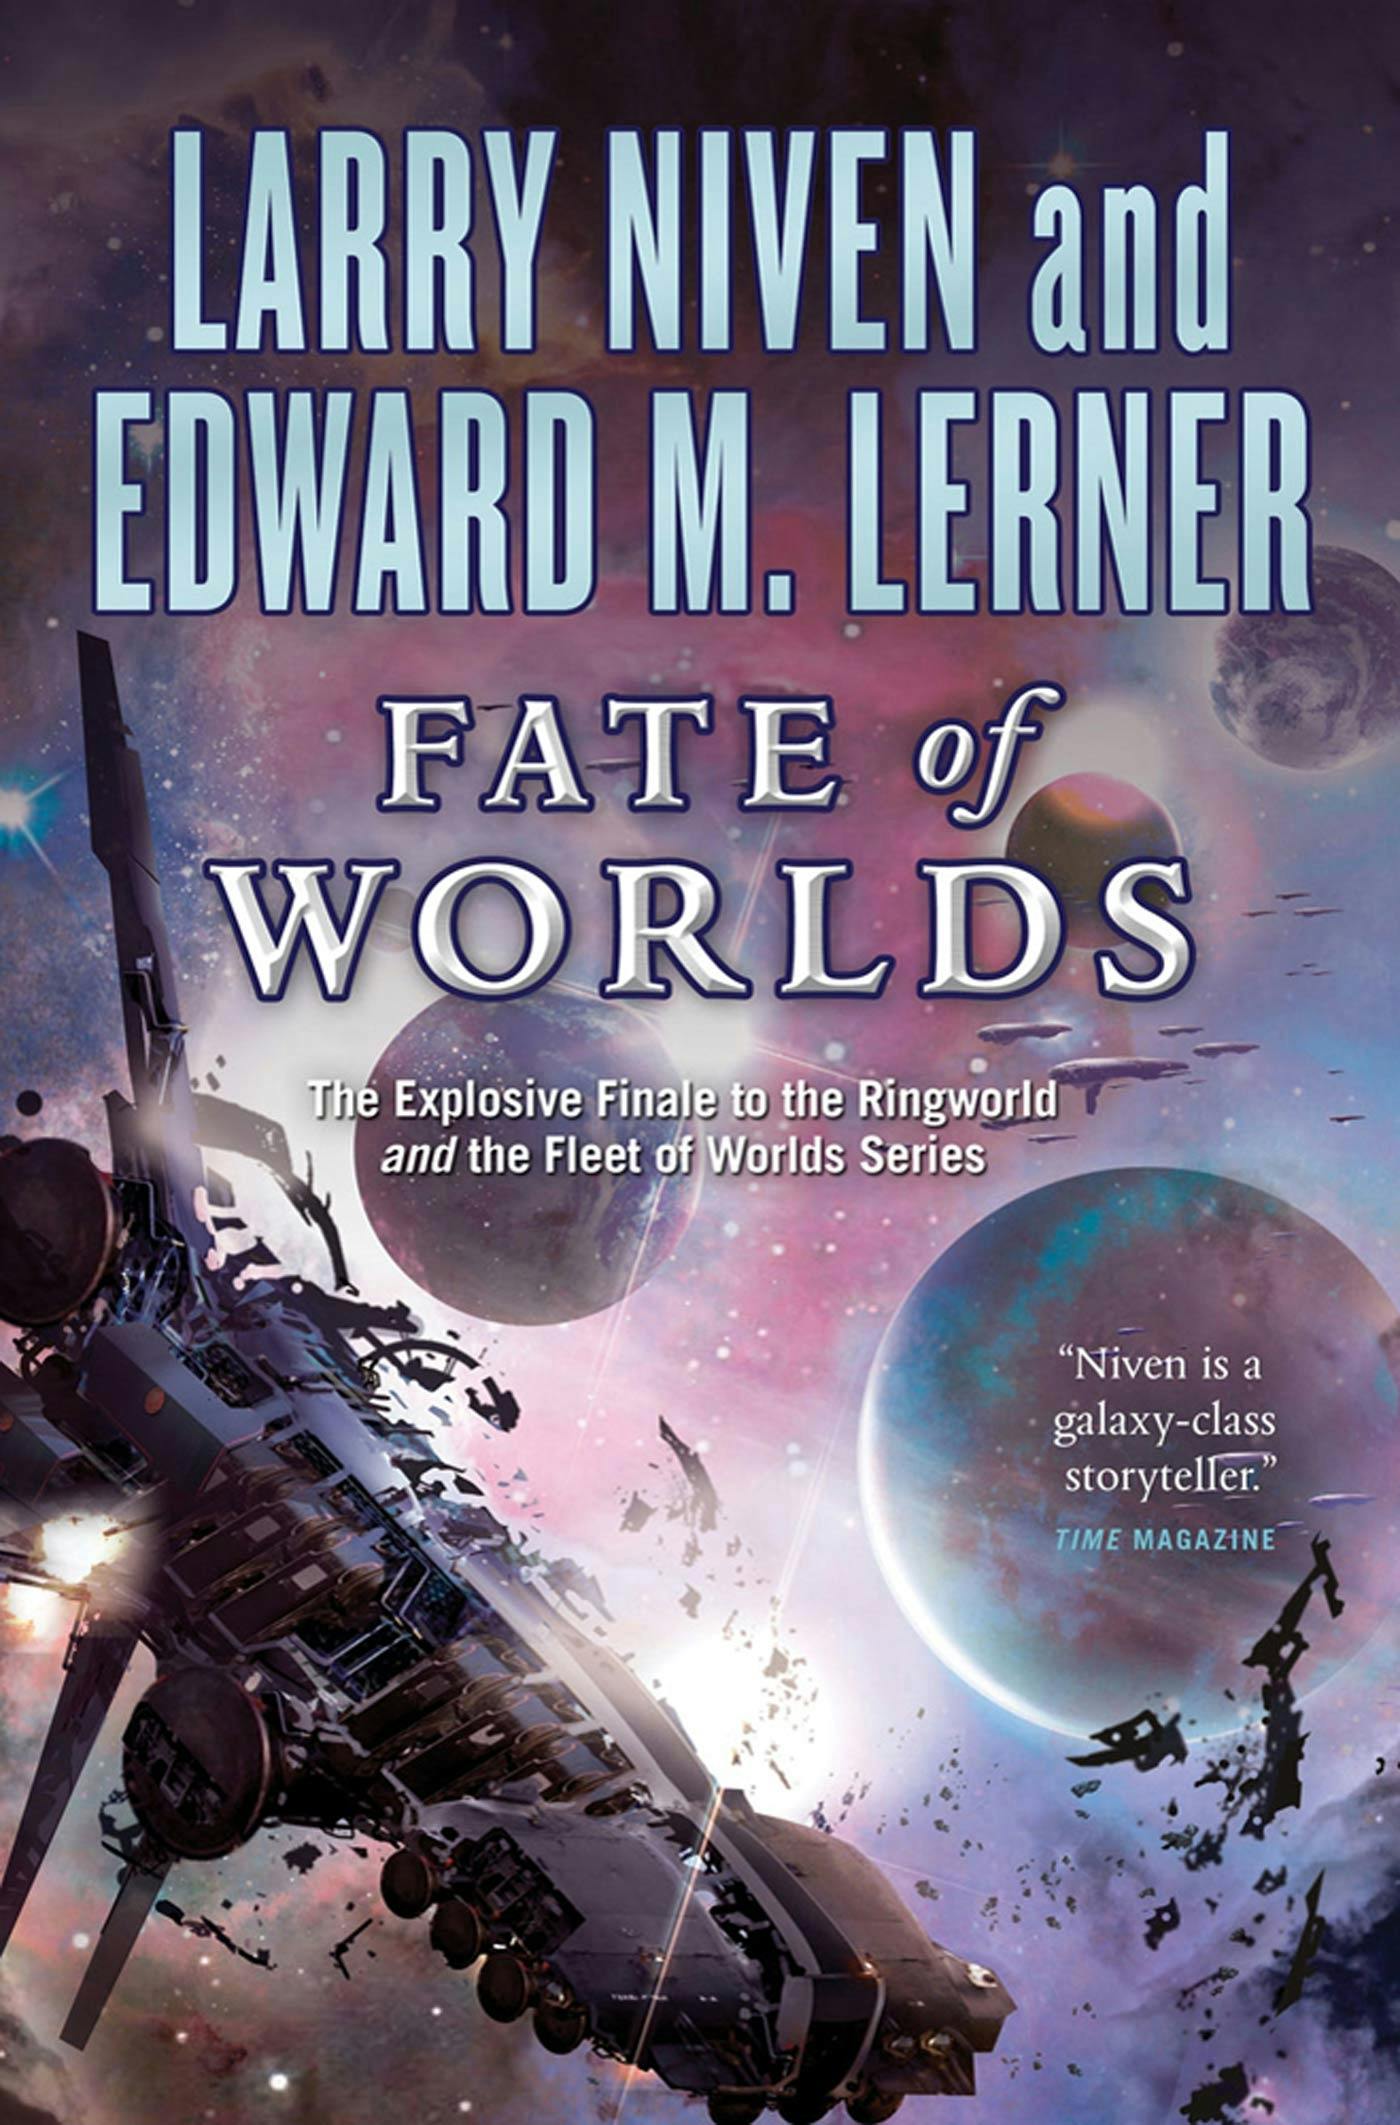 Cover for the book titled as: Fate of Worlds